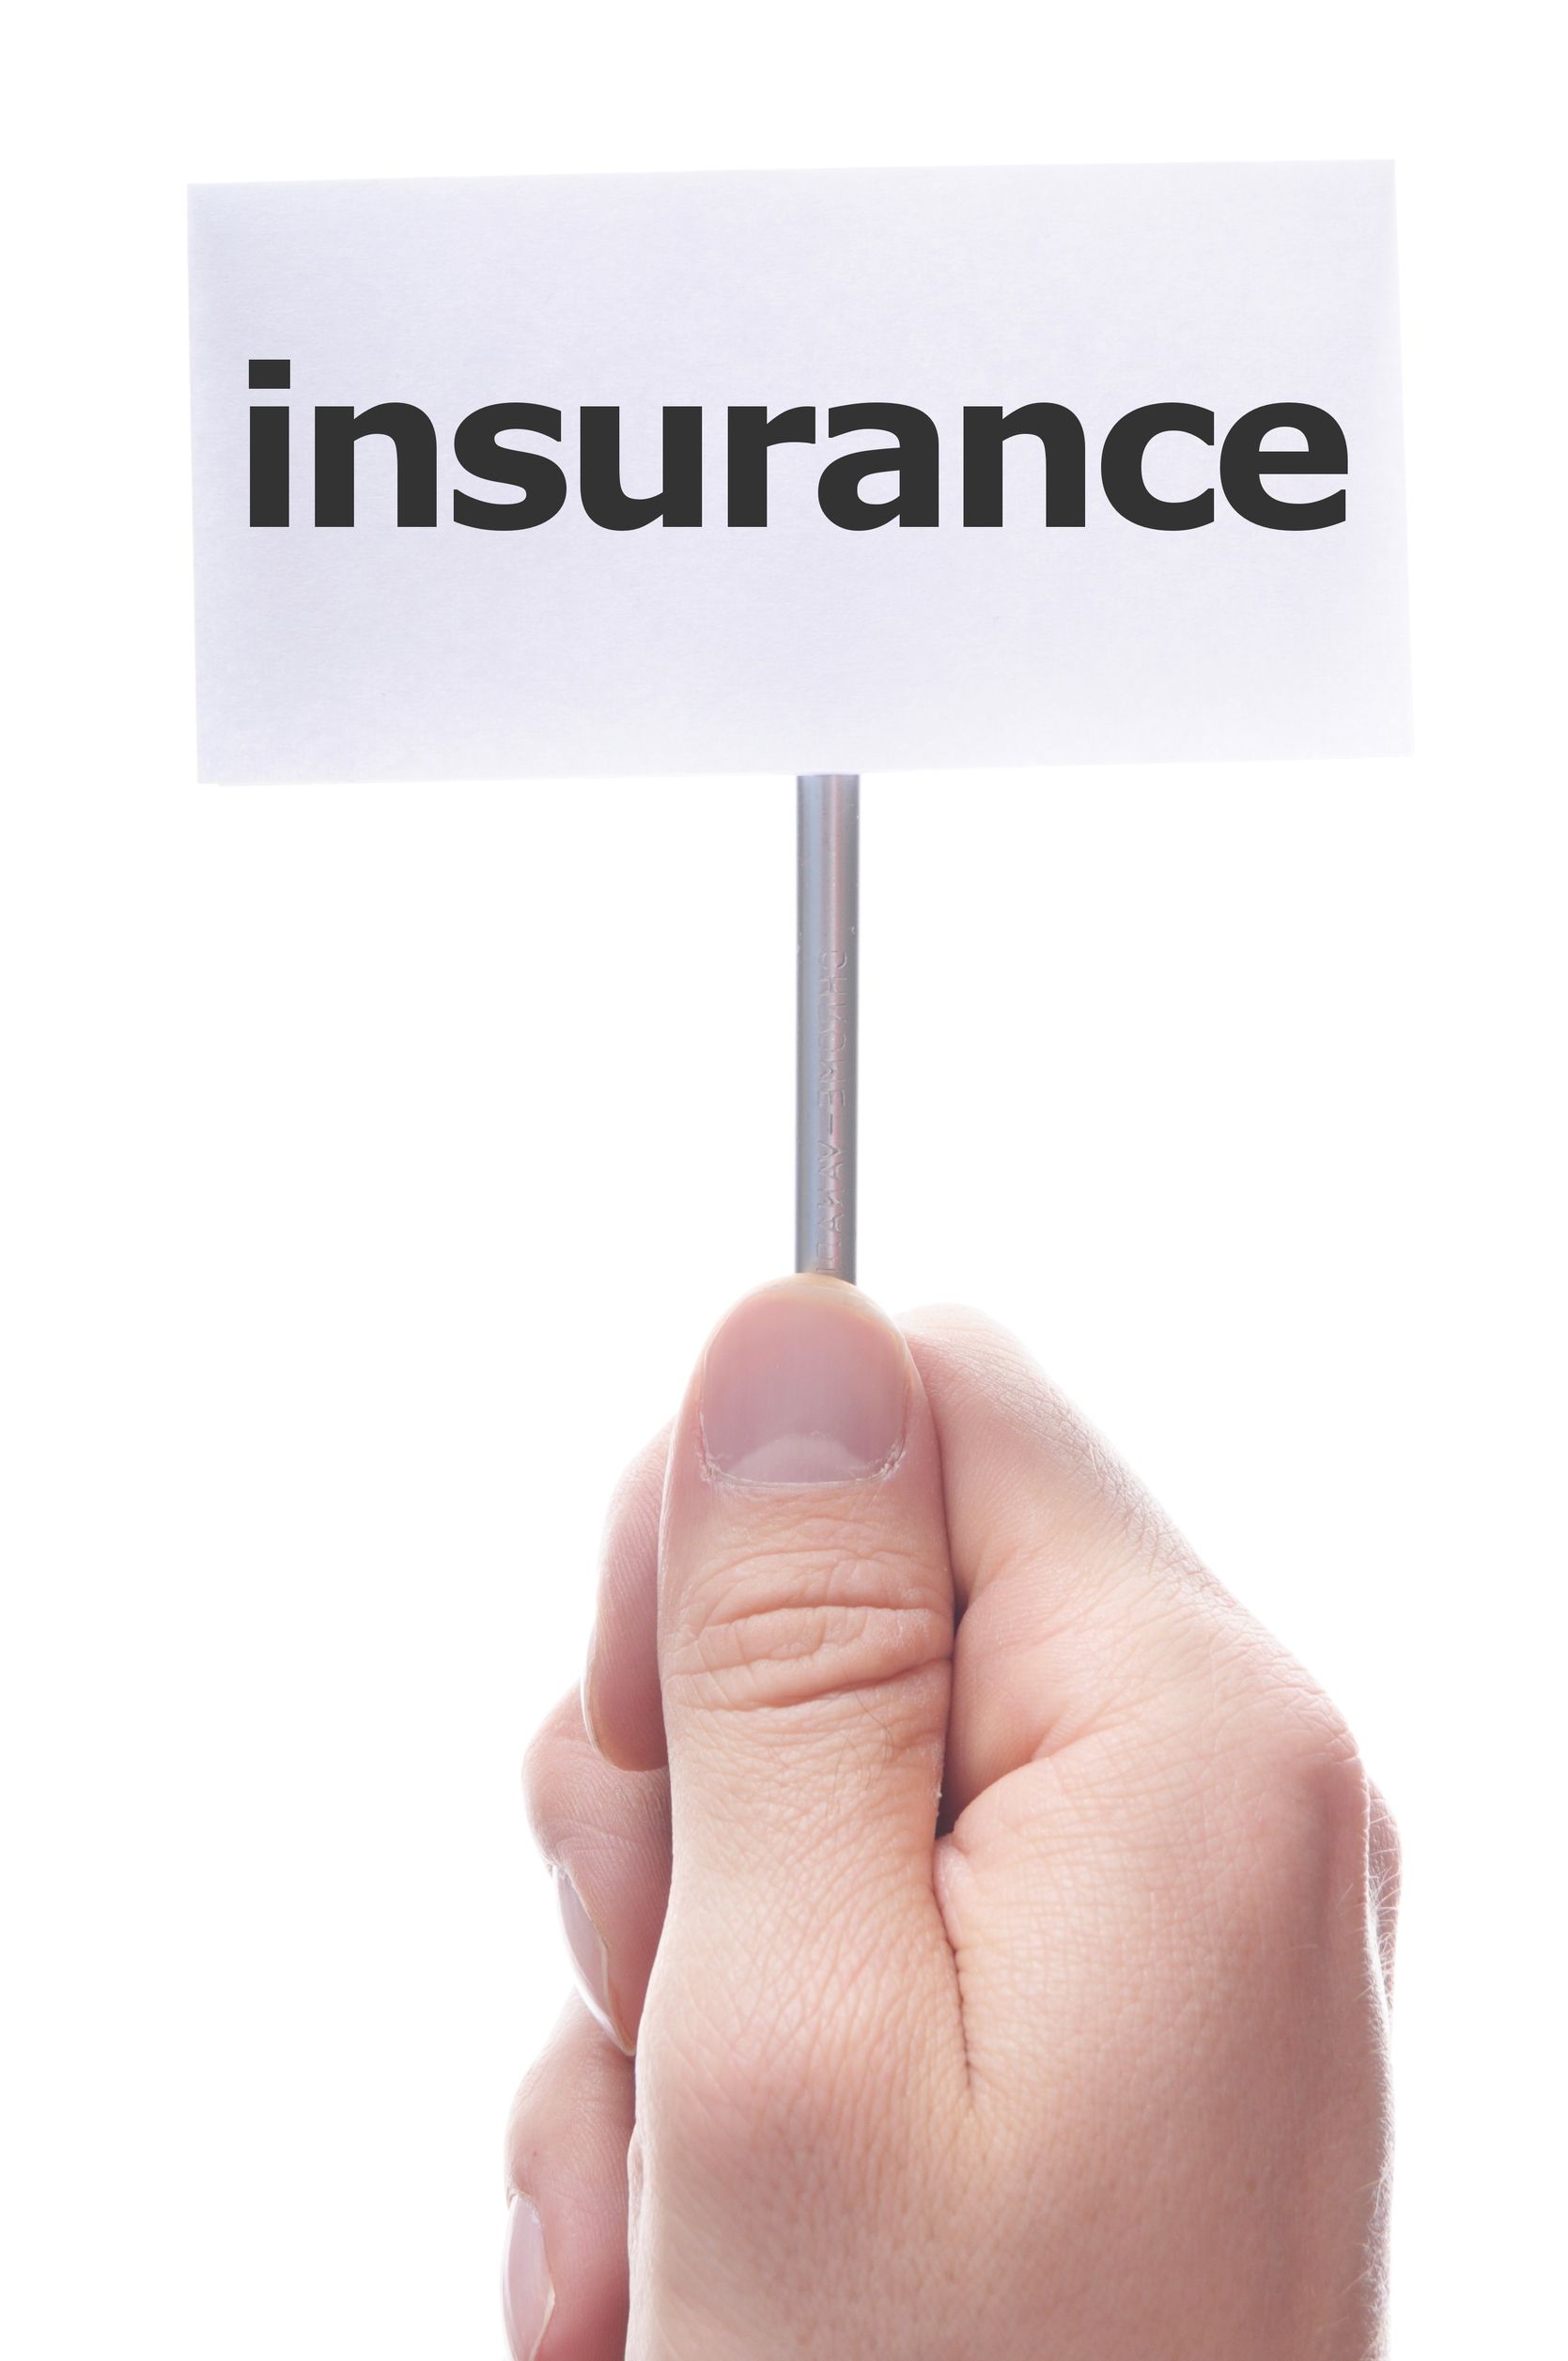 The Requirements For Motor Insurance In Harrisburg, PA